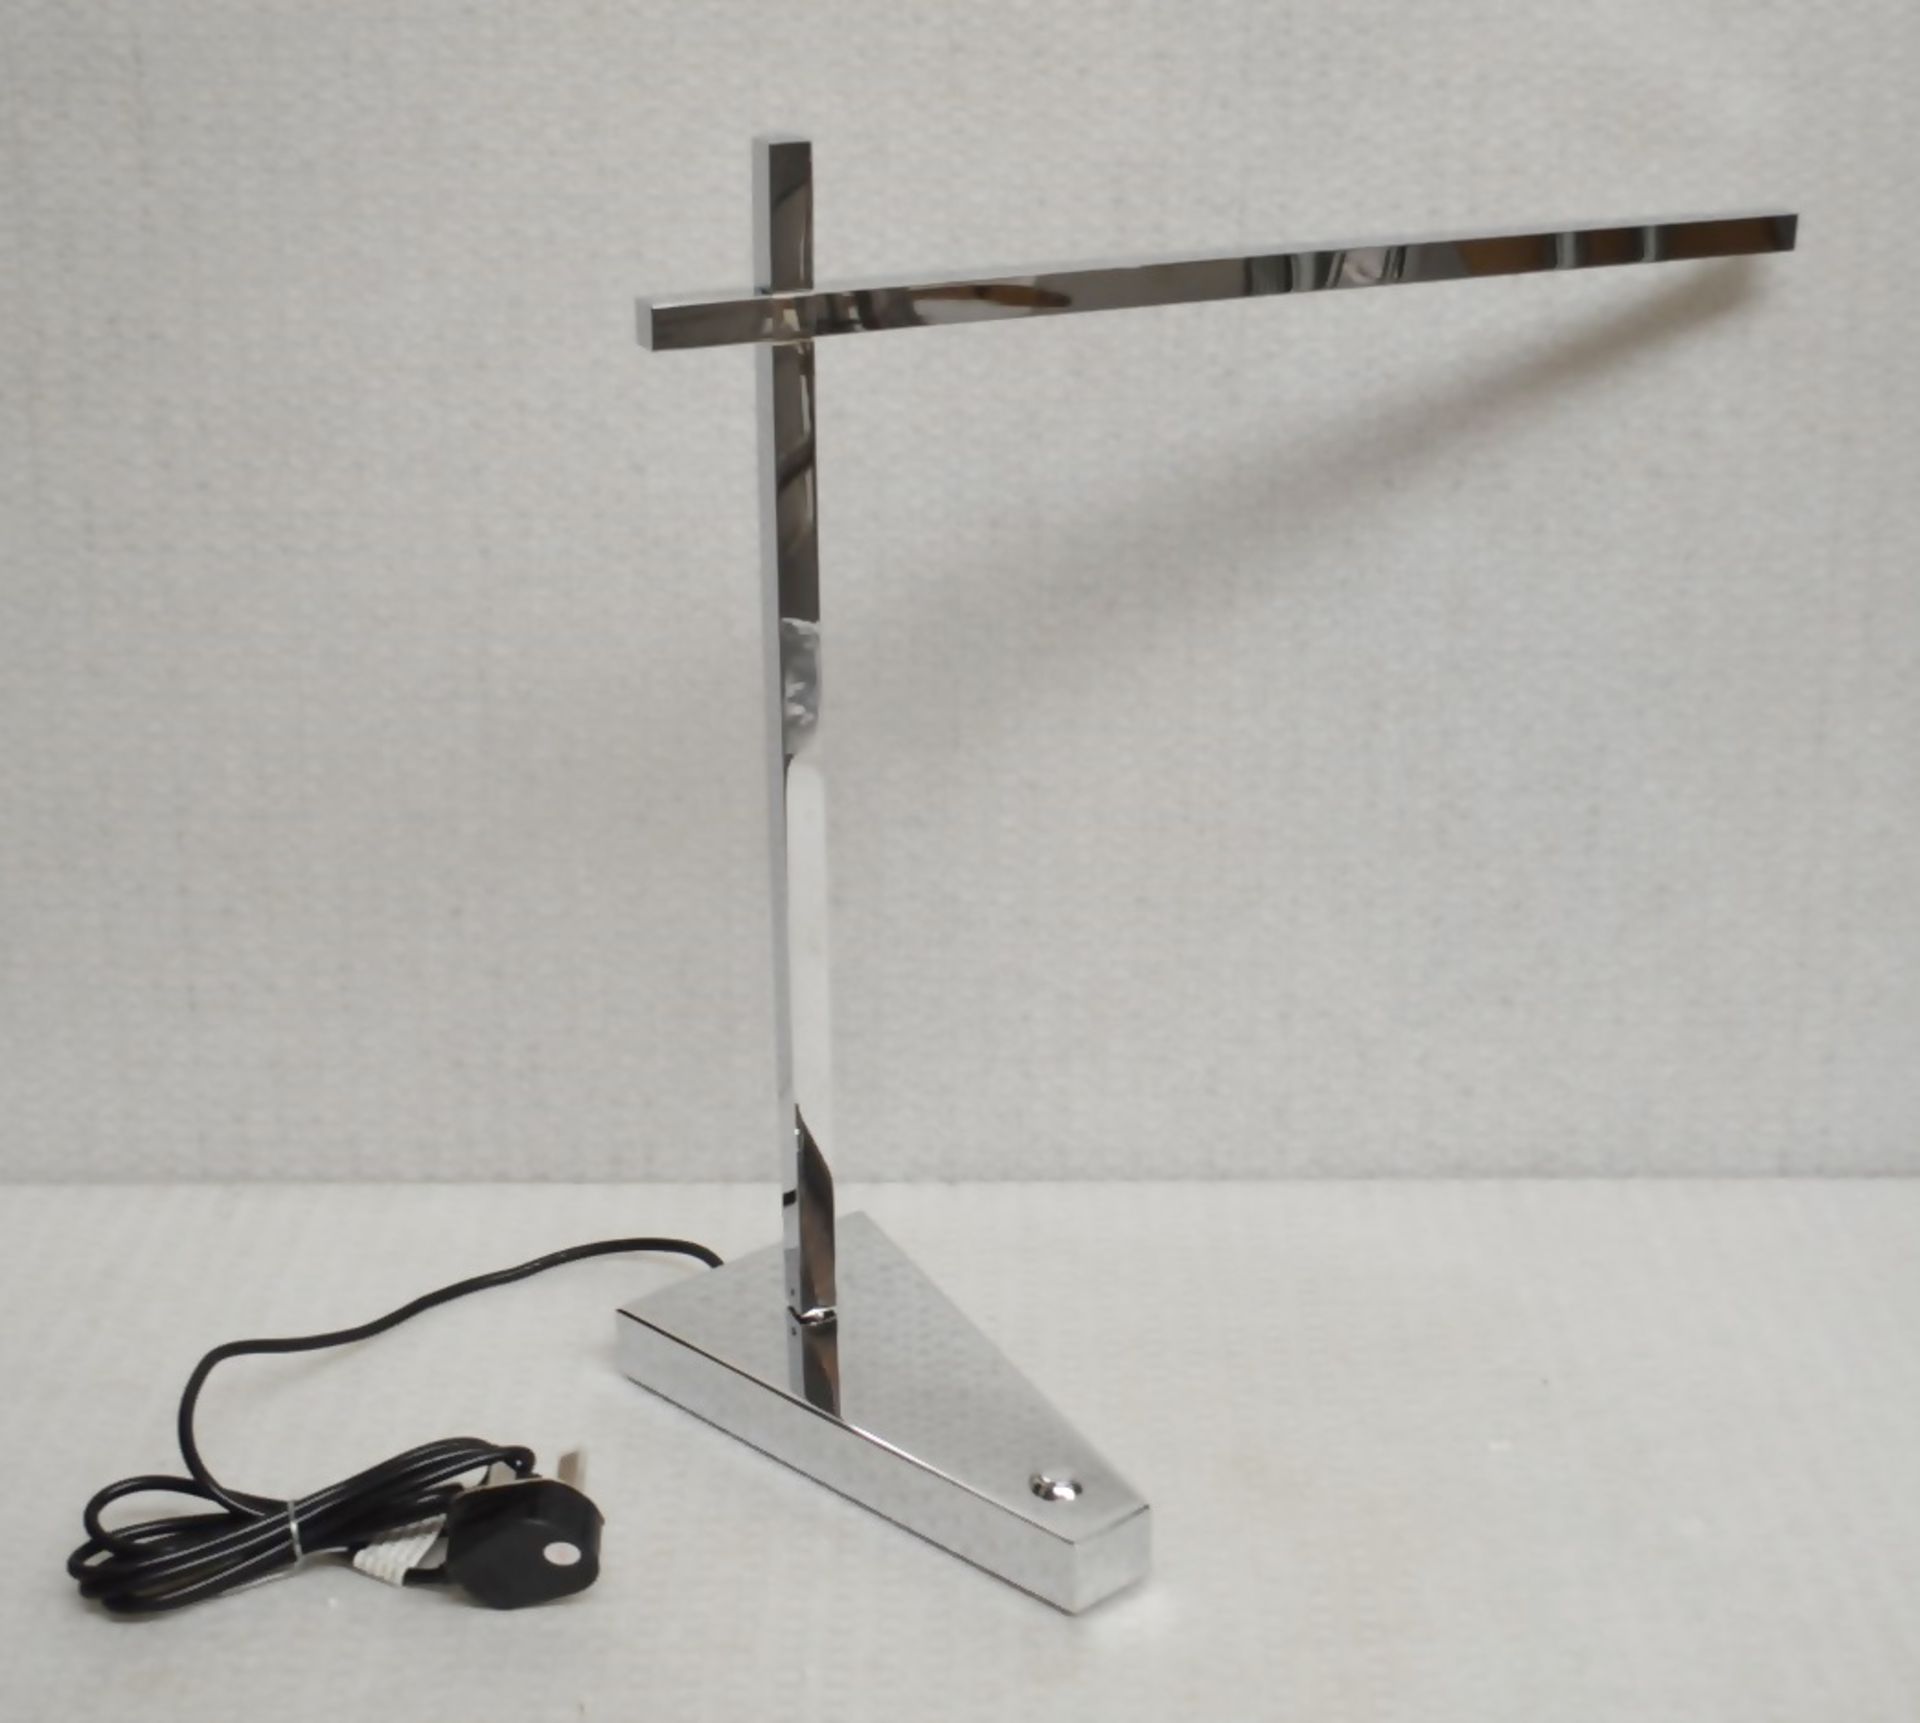 1 x CHELSOM 'Crane' Steel LED Desk Table Lamp With Directional Arm In A Chrome Finish - Unused Boxed - Image 4 of 10